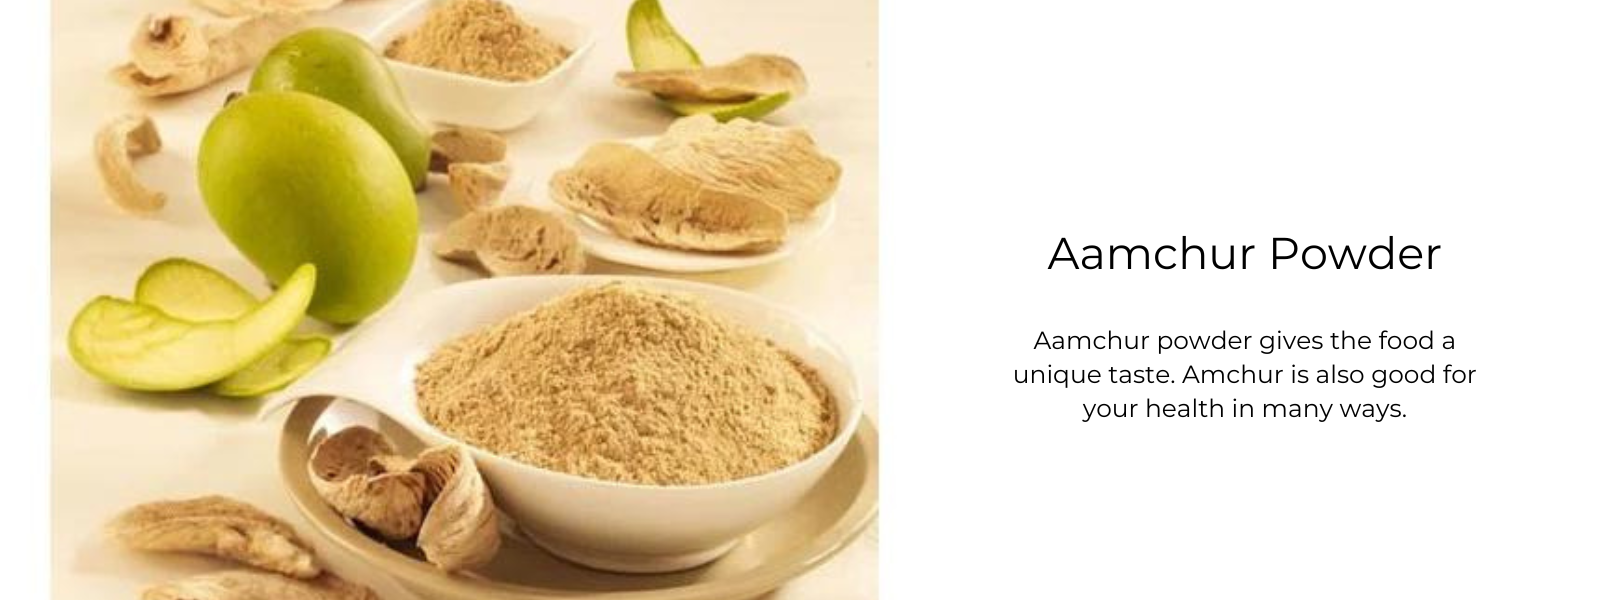 Aamchur Powder - Health Benefits, Uses and Important Facts